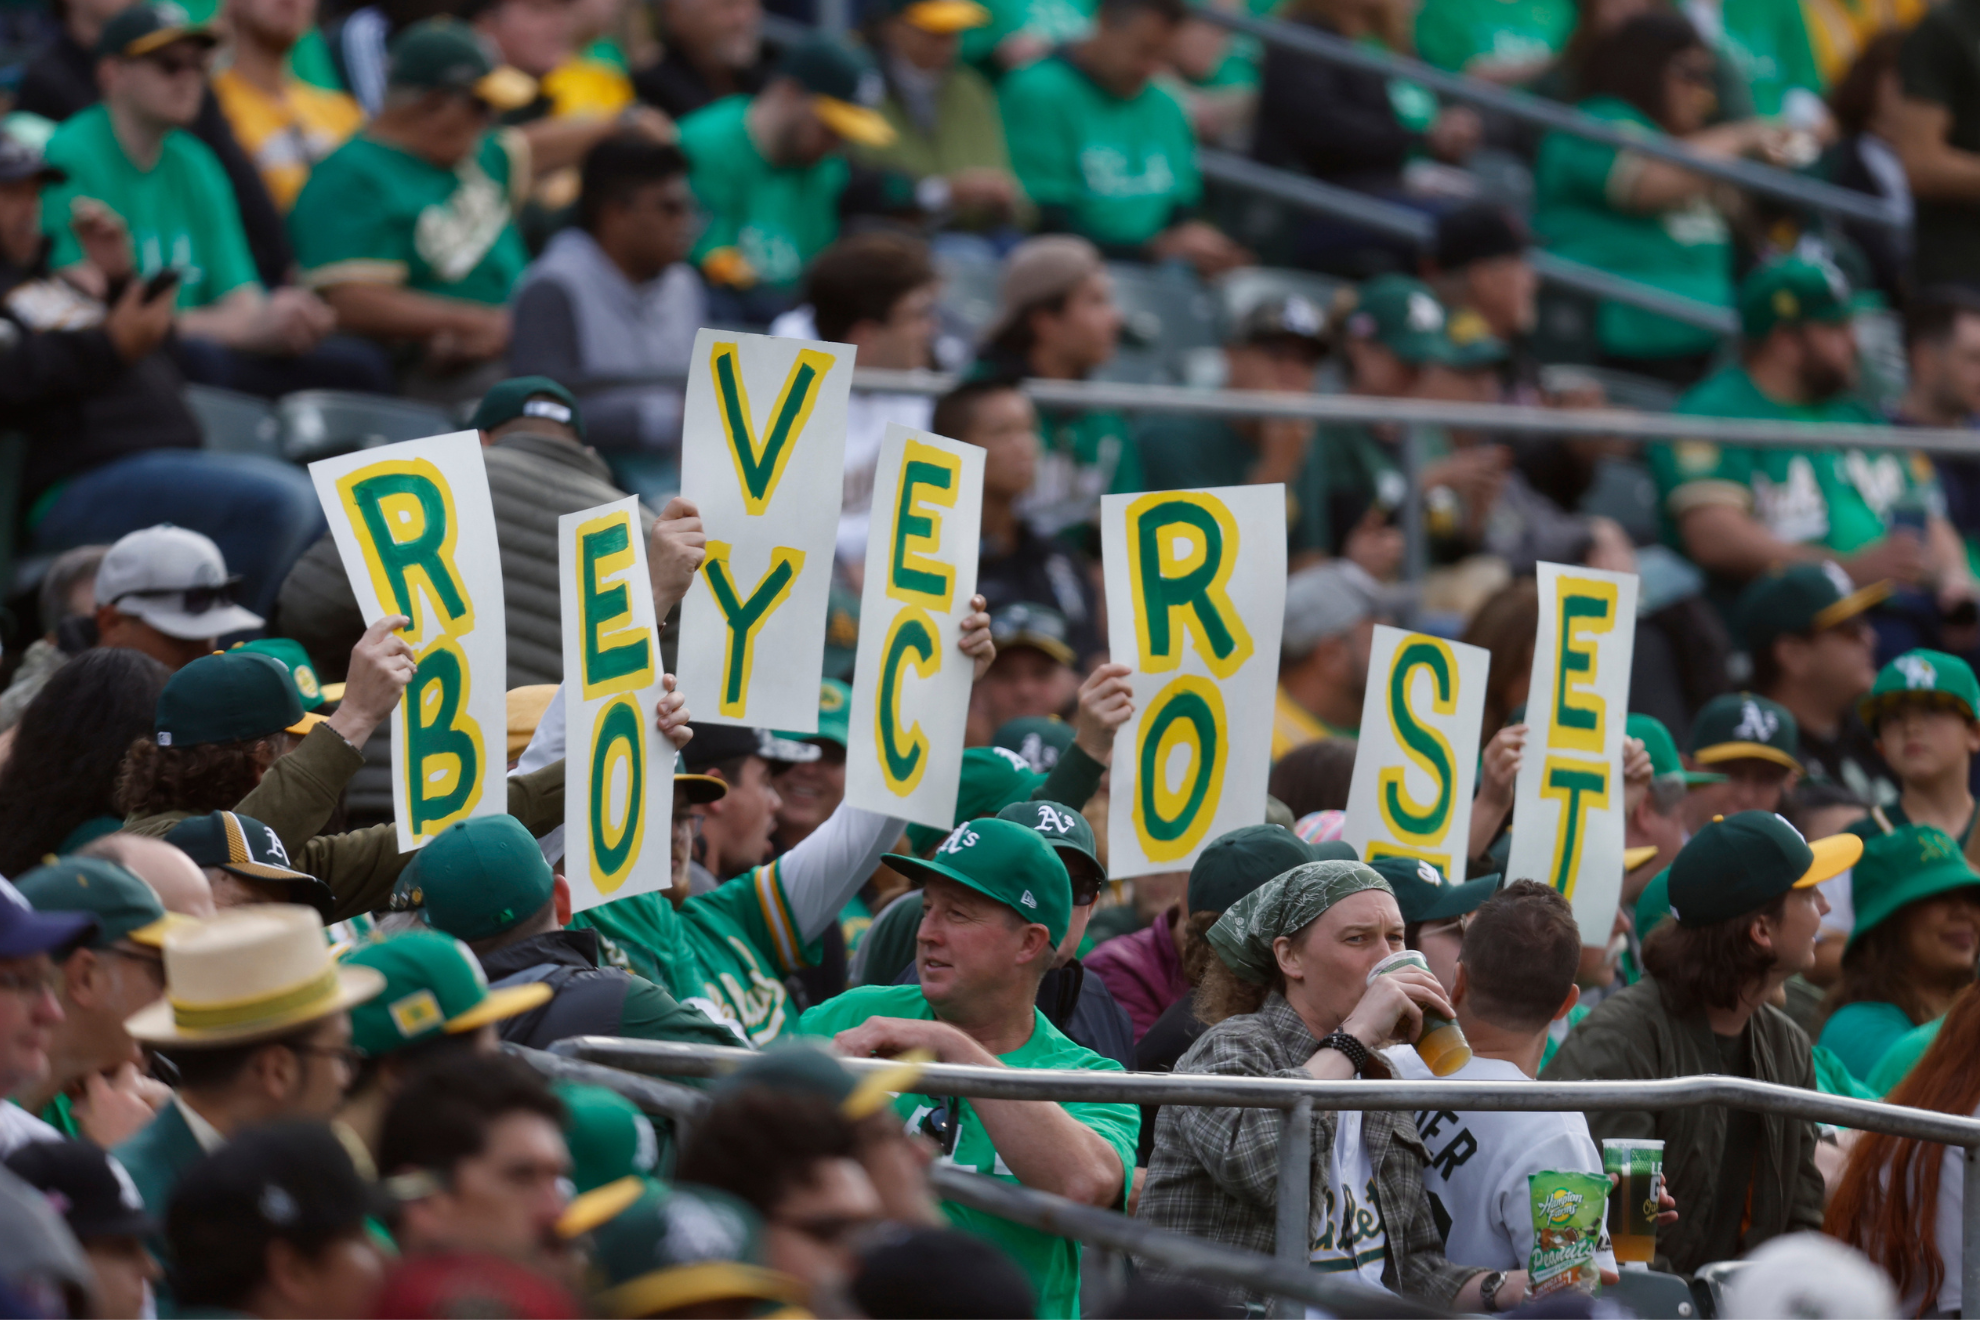 The A's had a season-high attendance figure on Tuesday night.